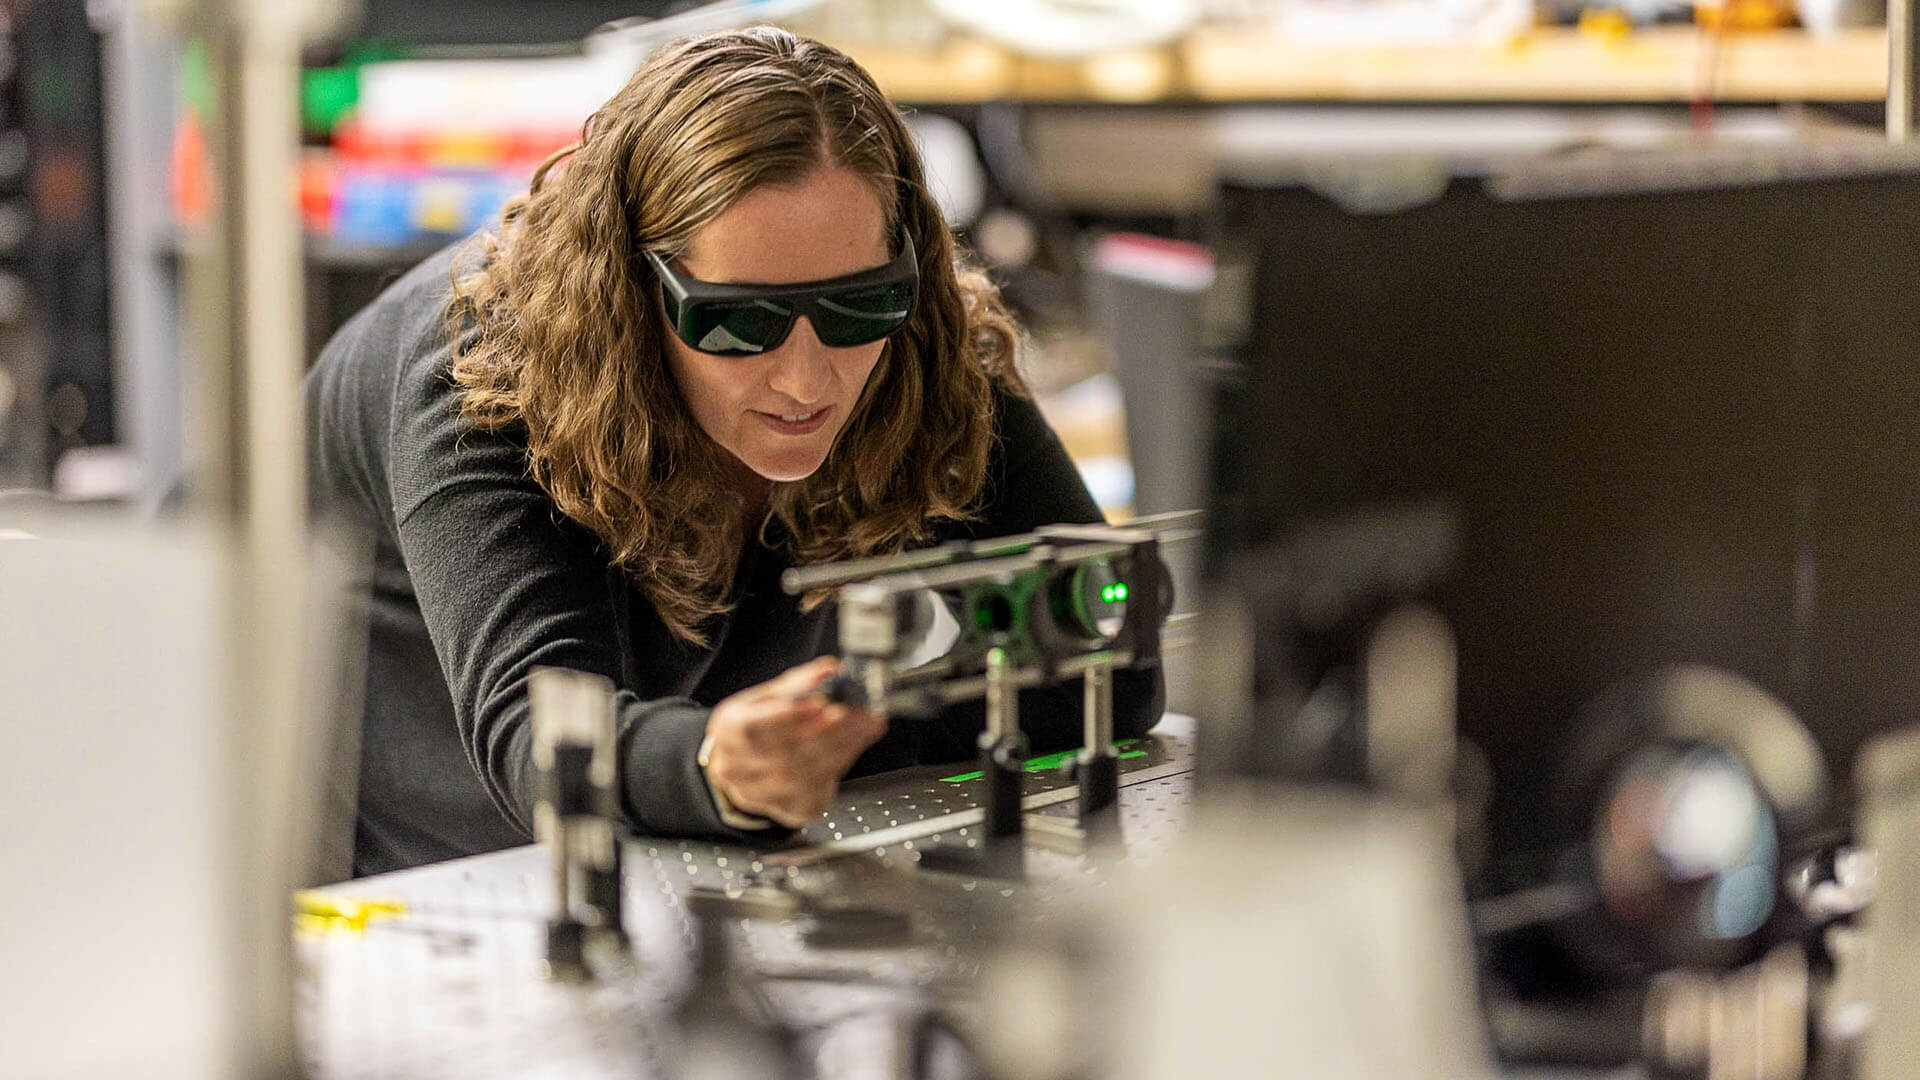 Laura wears dark glasses uses equipment in a computer imaging lab